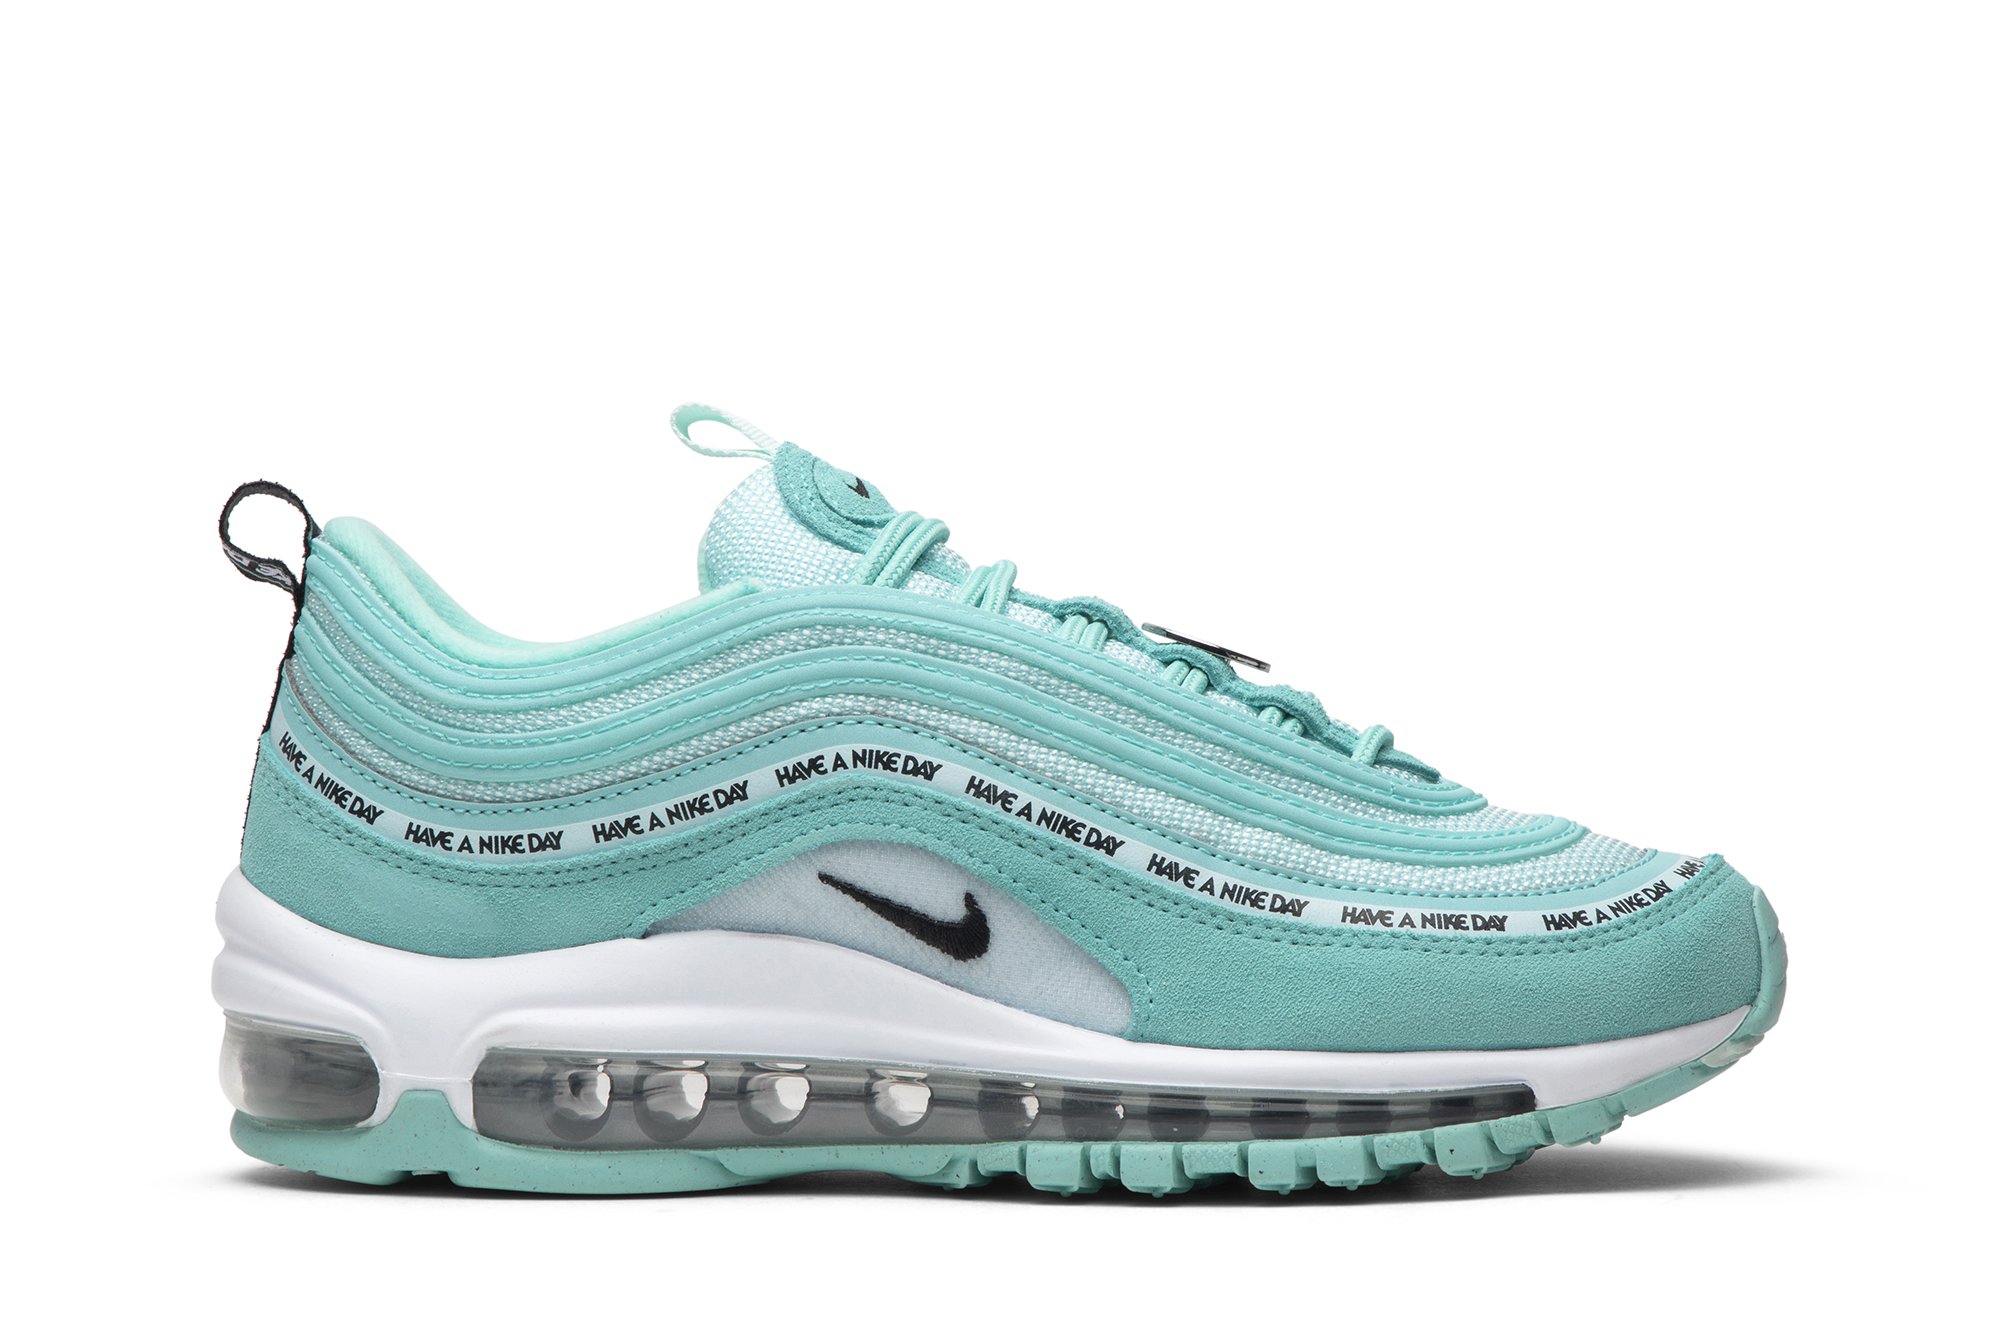 Buy Air Max 97 GS 'Have A Nike Day - Tropical Twist' - 923288 300